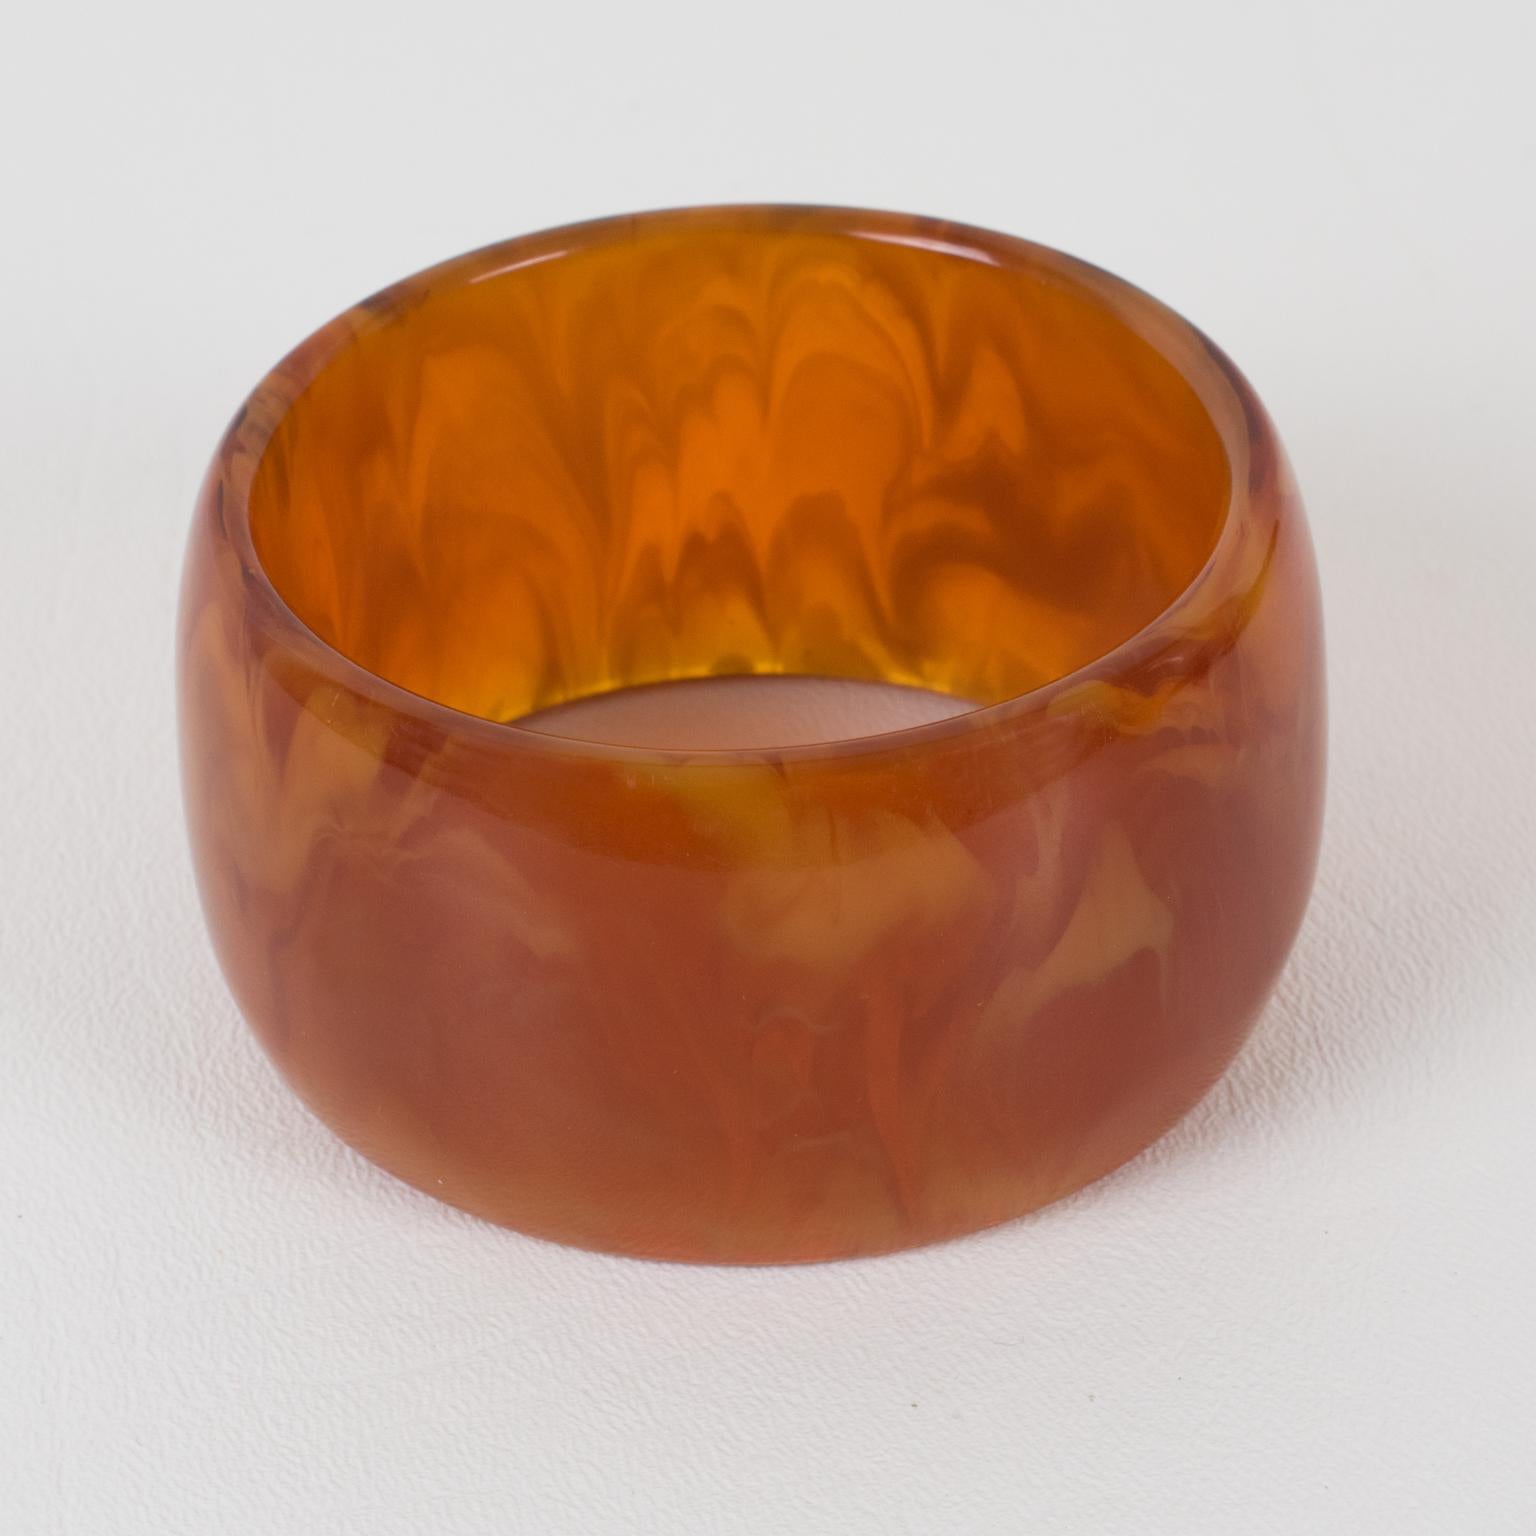 This lovely red tea amber marble Bakelite bracelet bangle features an oversized wide domed shape. The intense red tea marble tone has honey amber cloudy swirling and transparency. 
Measurements: Inside across is 2.57 in diameter (6.5 cm) - outside